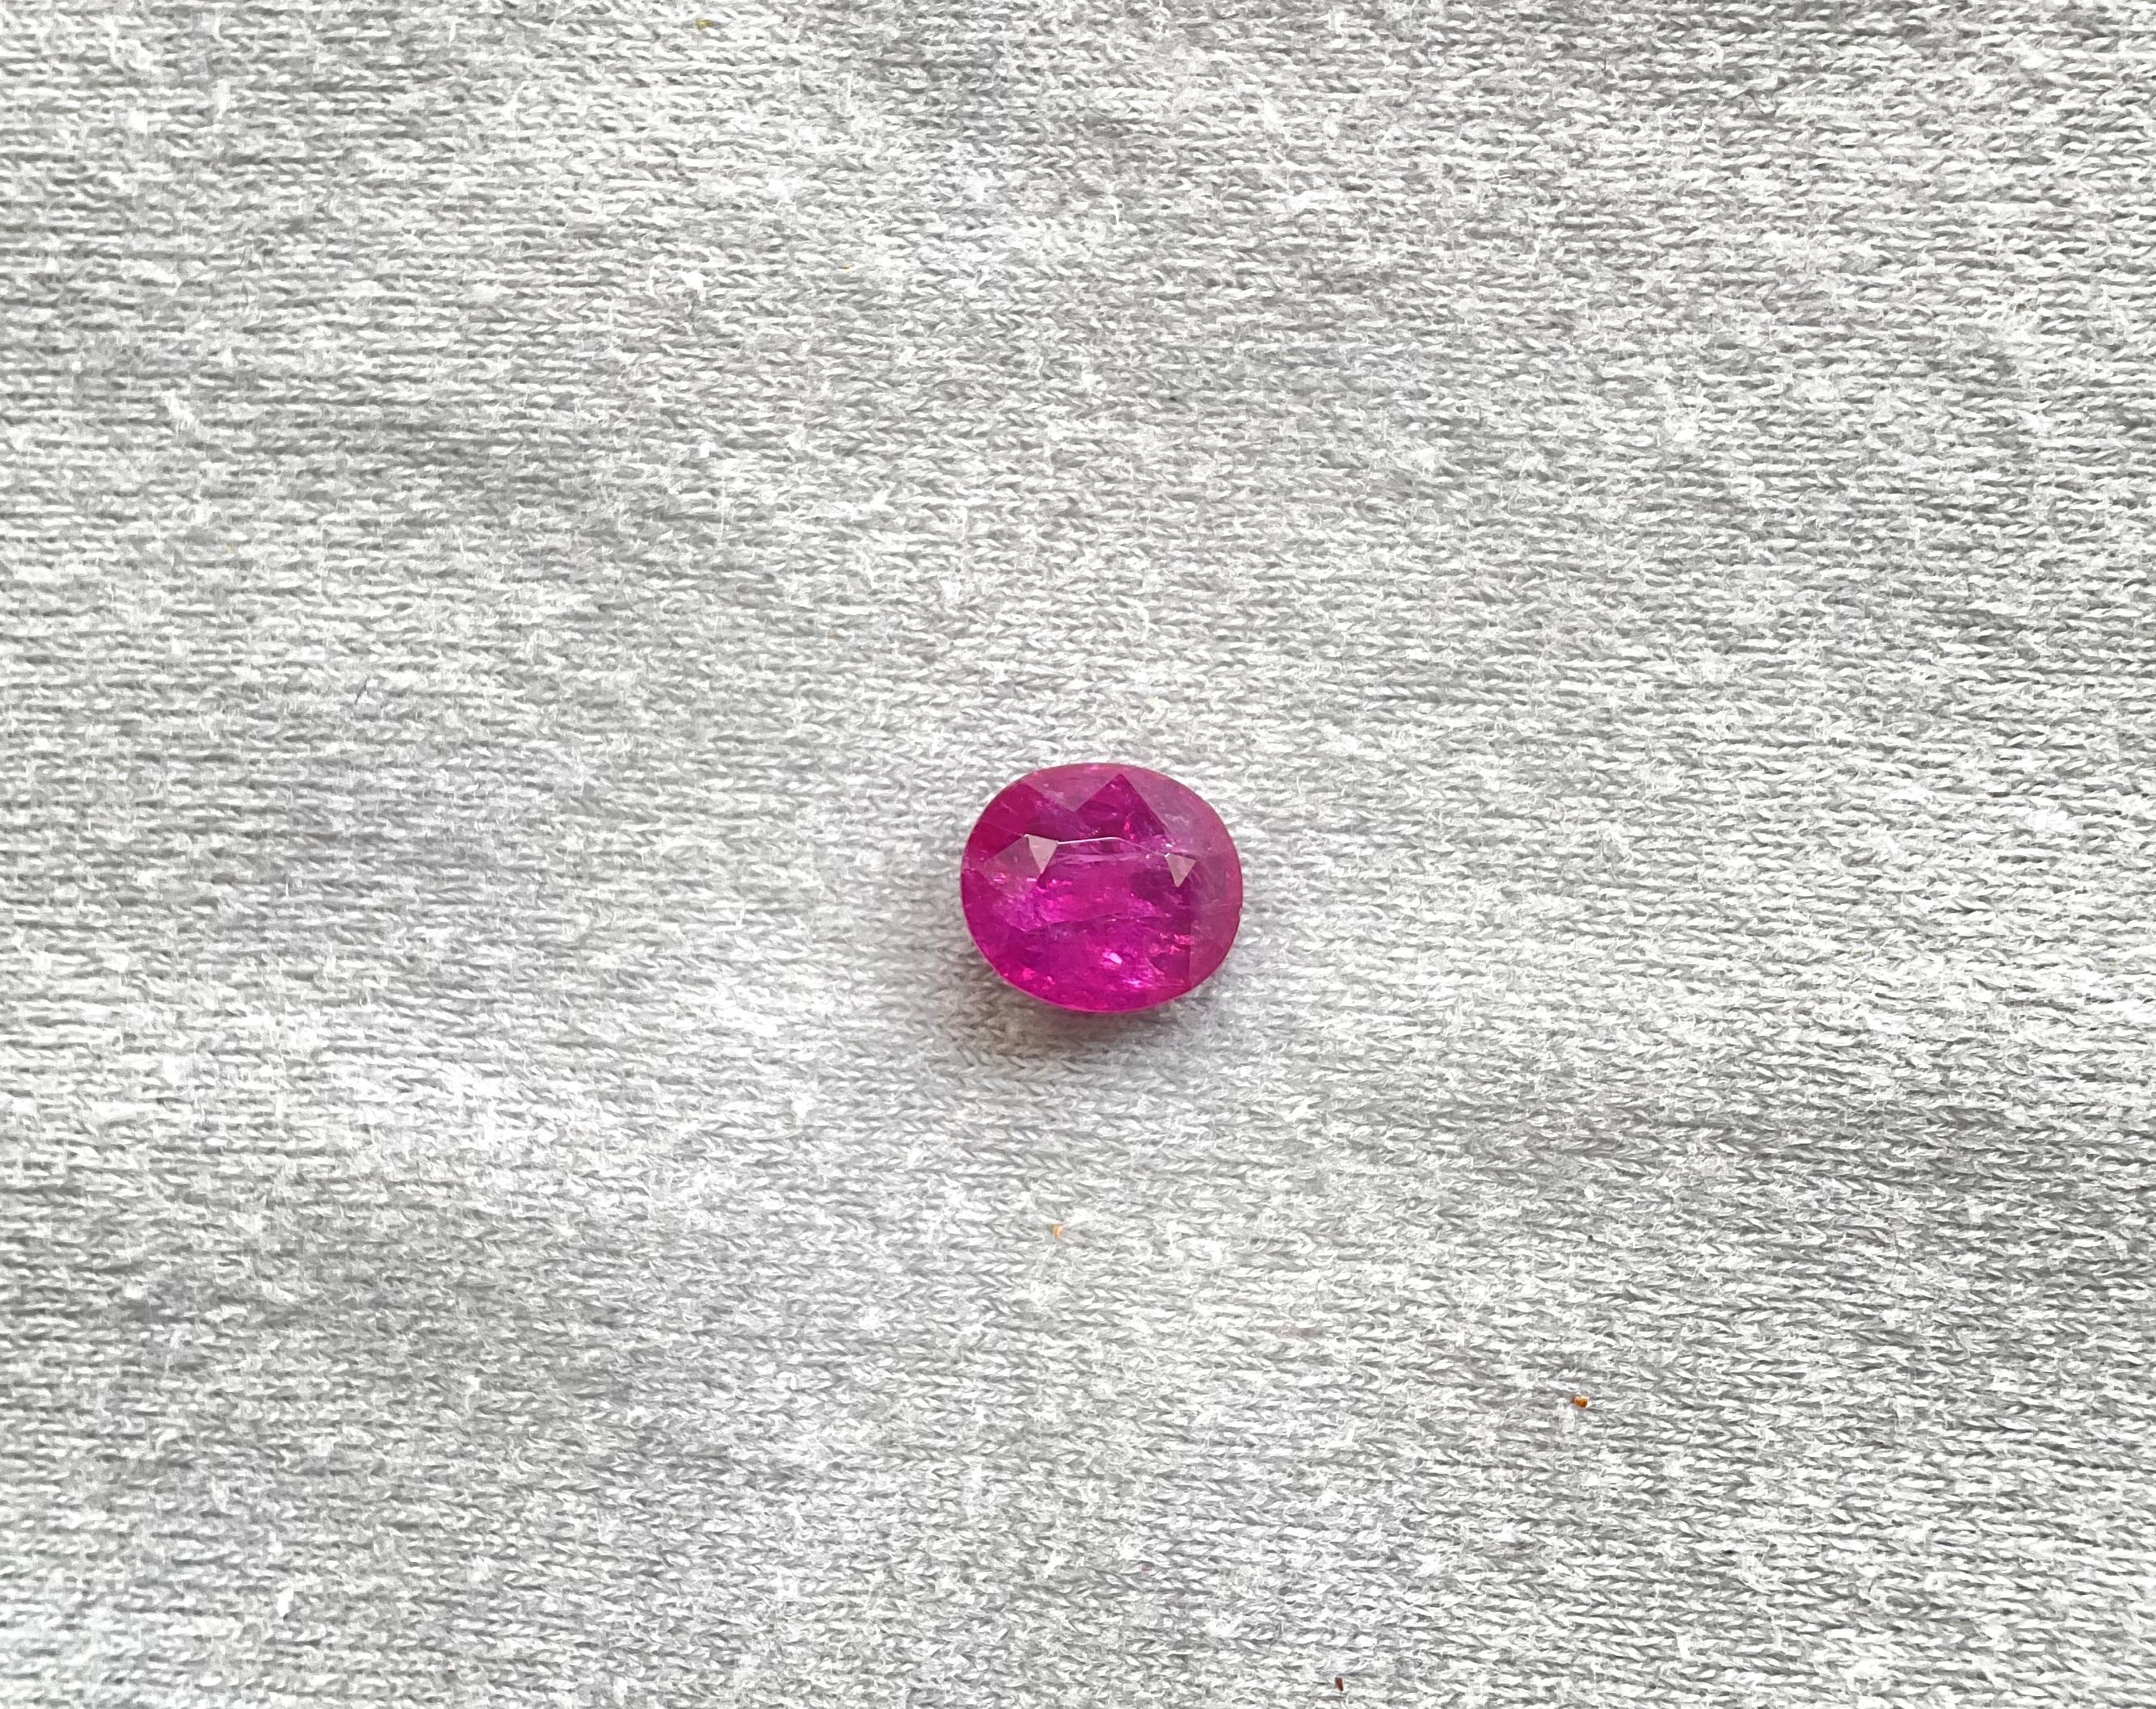 As we are auction partners at Gemfields, we have sourced these rubies from winning auctions and had cut them in our in house manufacturing responsibly.

Weight: 2.73 Carats
Size: 9x8x4 MM
Pieces: 1
Shape: Faceted oval Cut stone